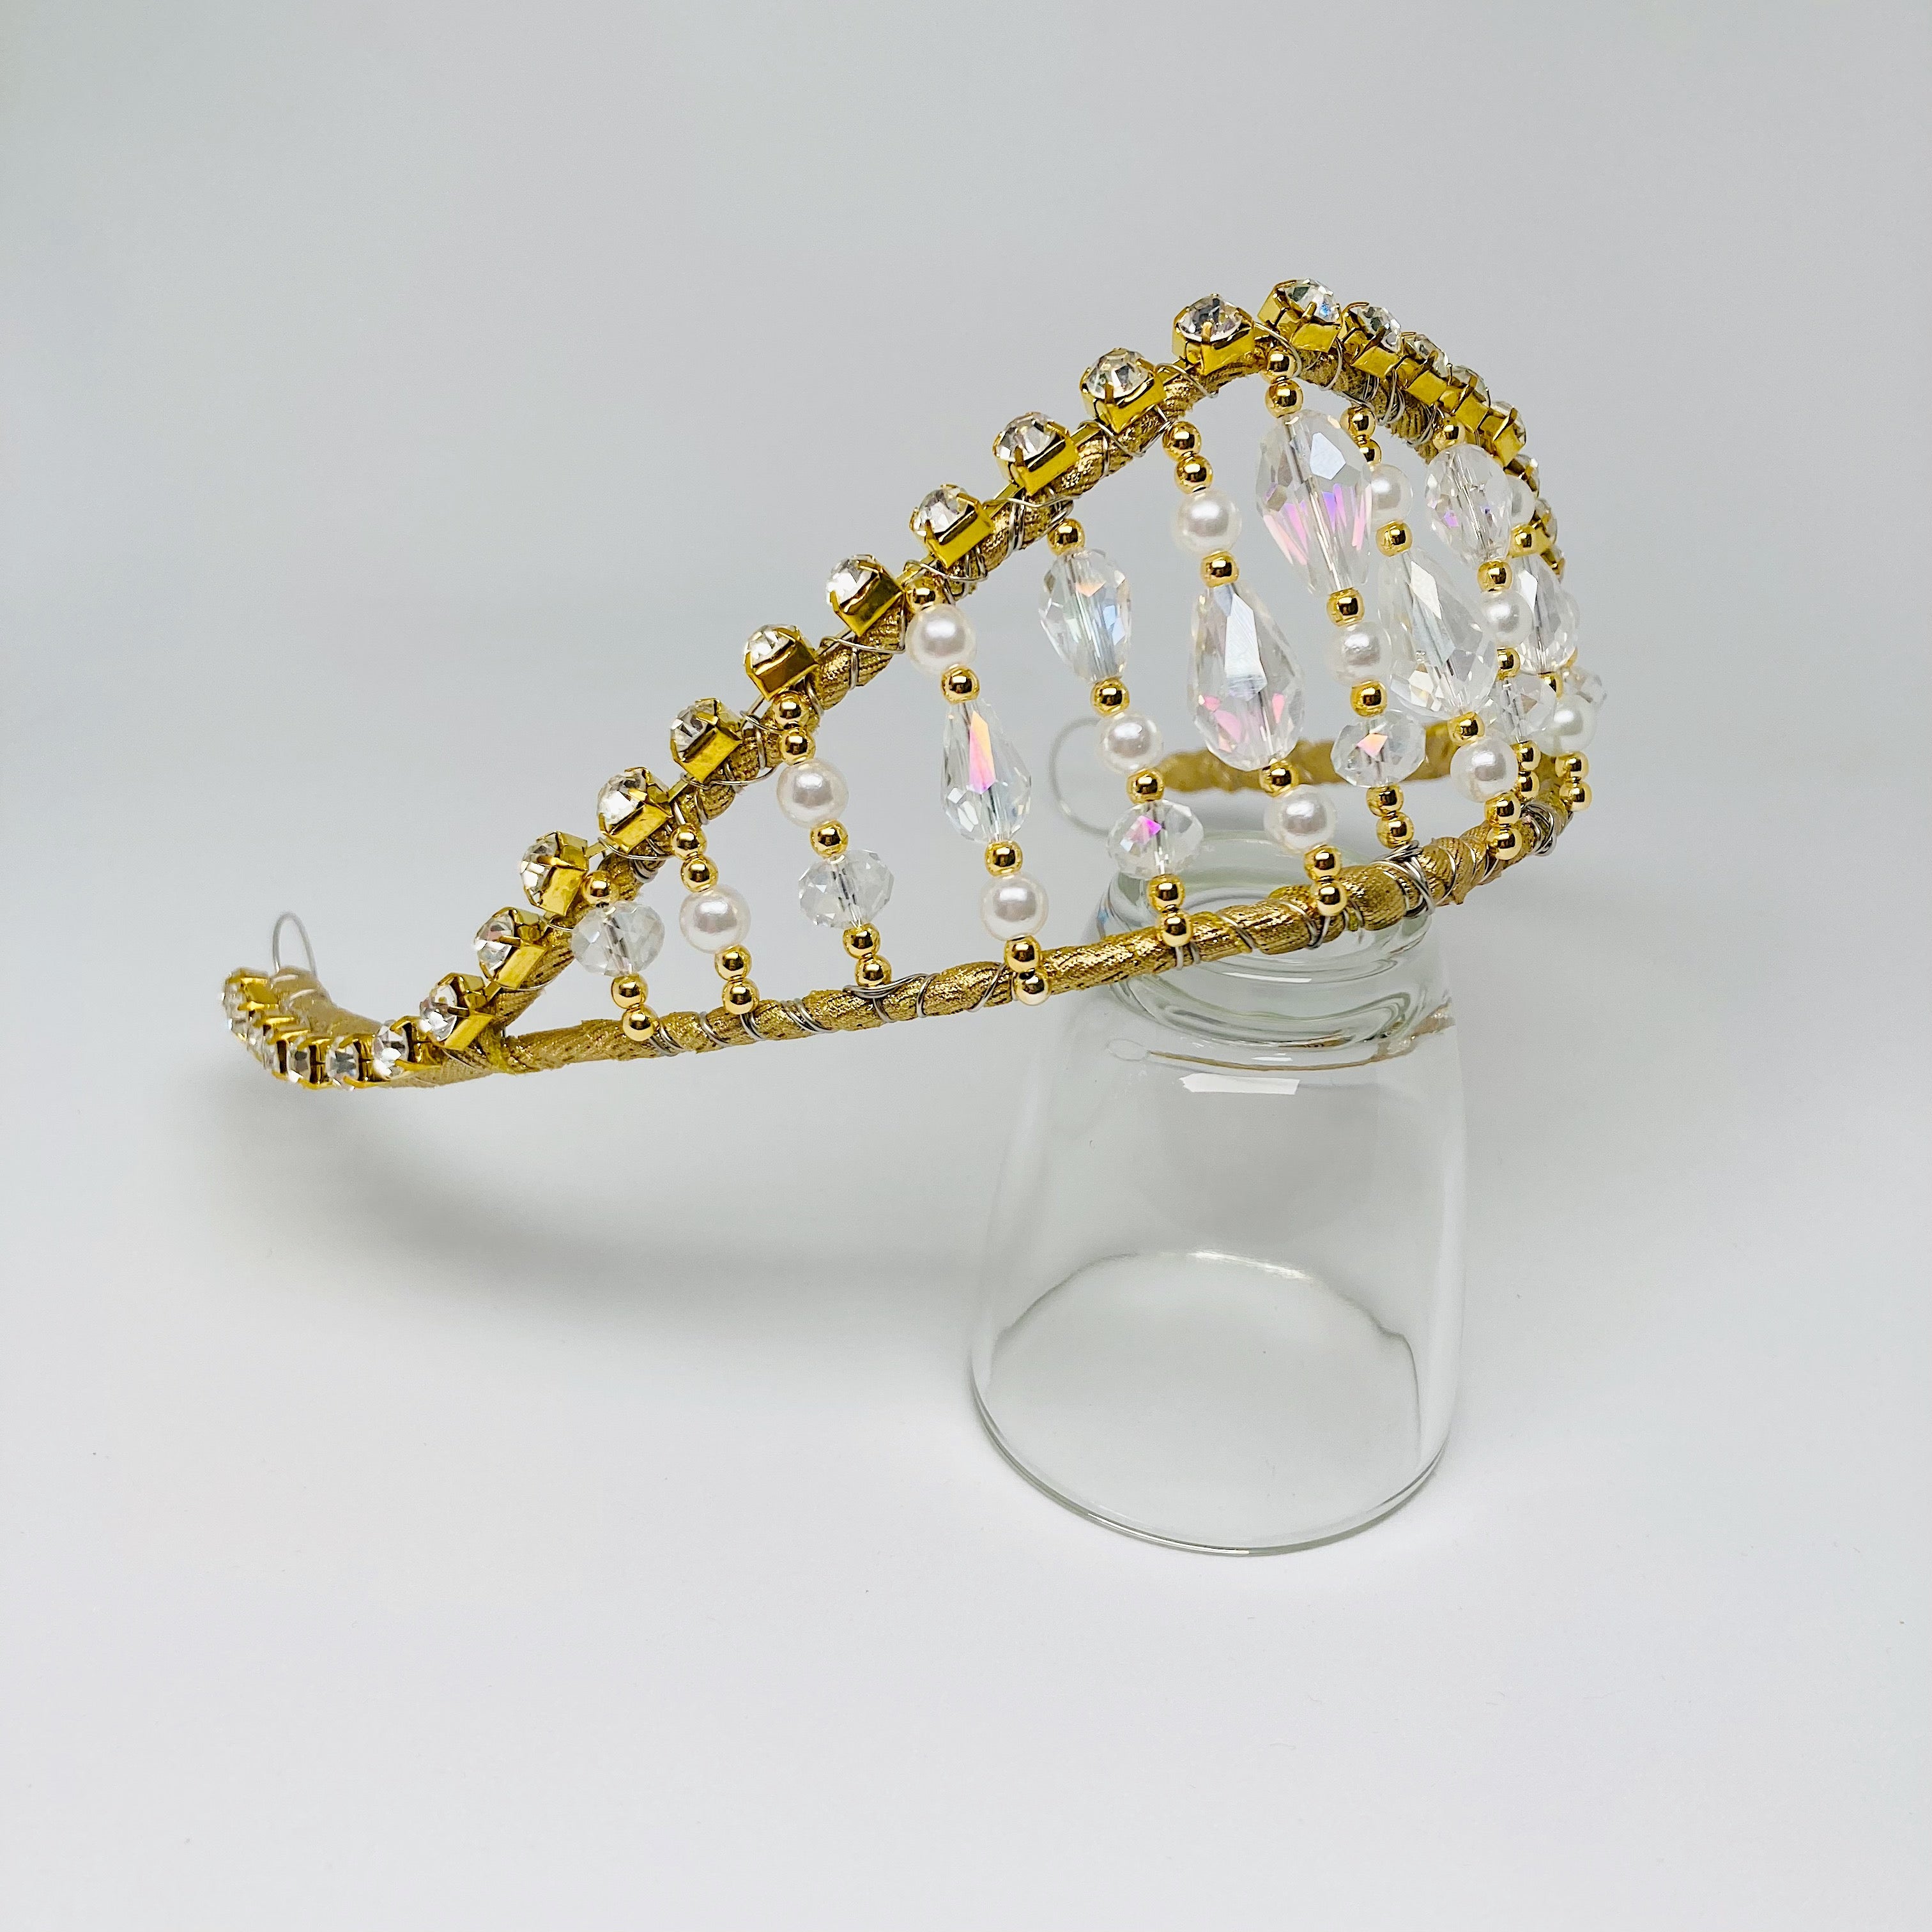 Side view of gold tiara embellished with rhinestones, clear crystals, gold beads and pearls.  The tiara is resting on a clear glass. 